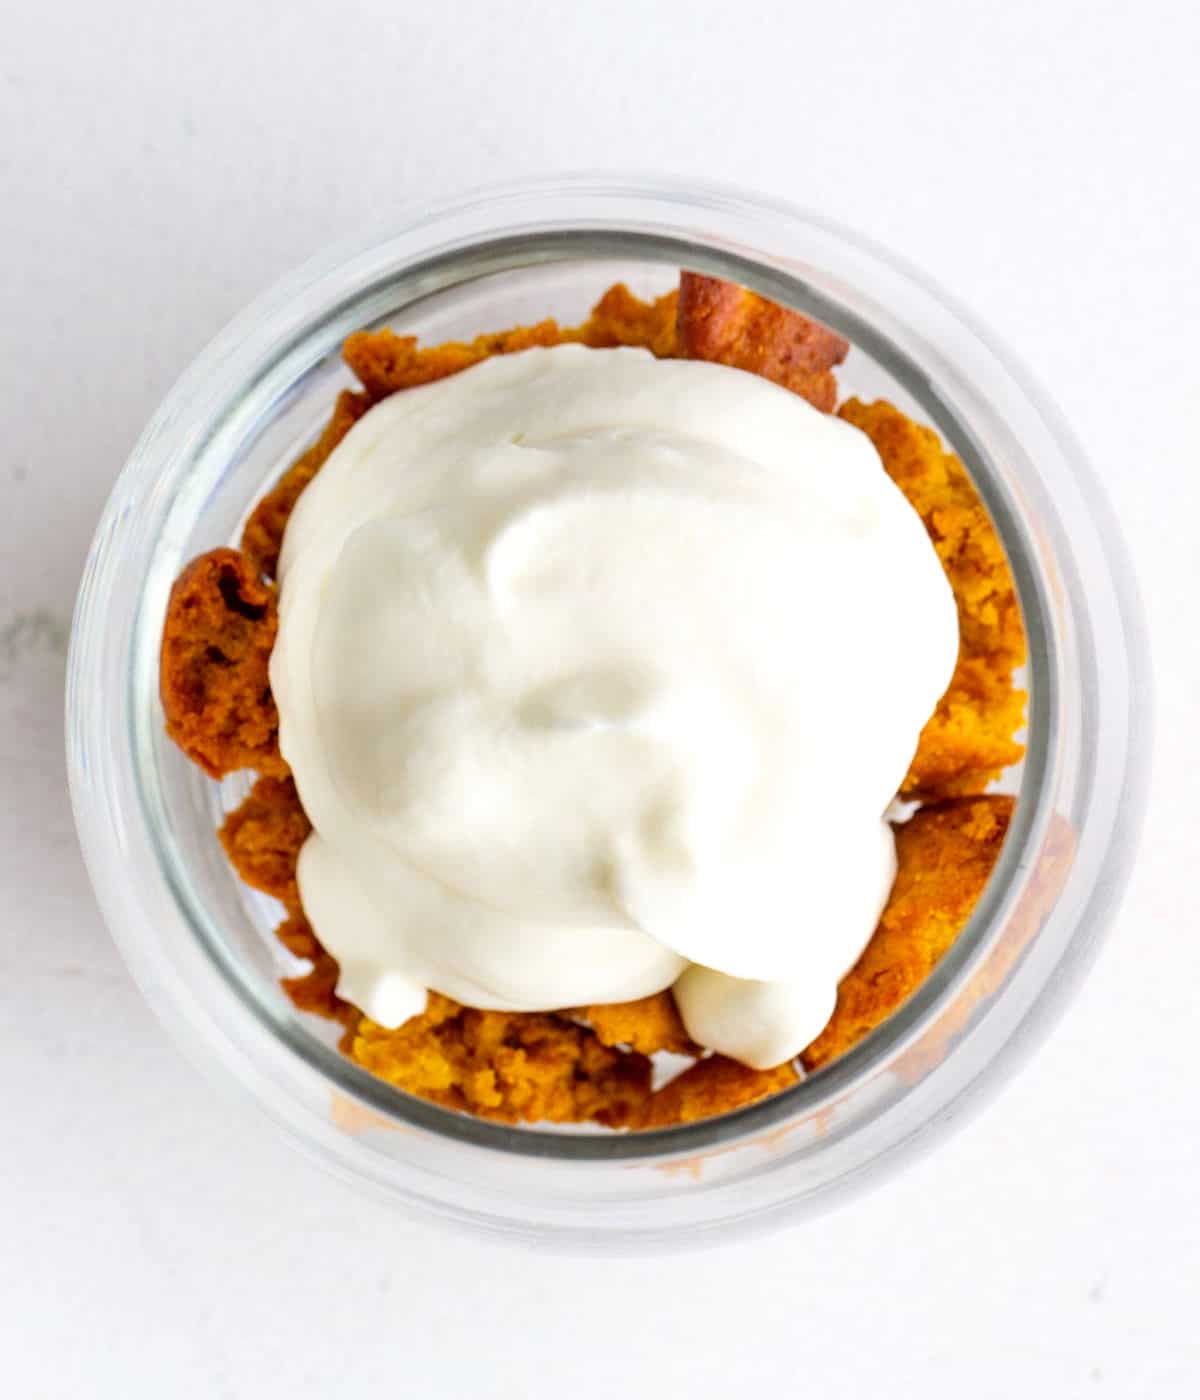 Top view of whipped cream dollop atop pumpkin cake crumbs in a glass.